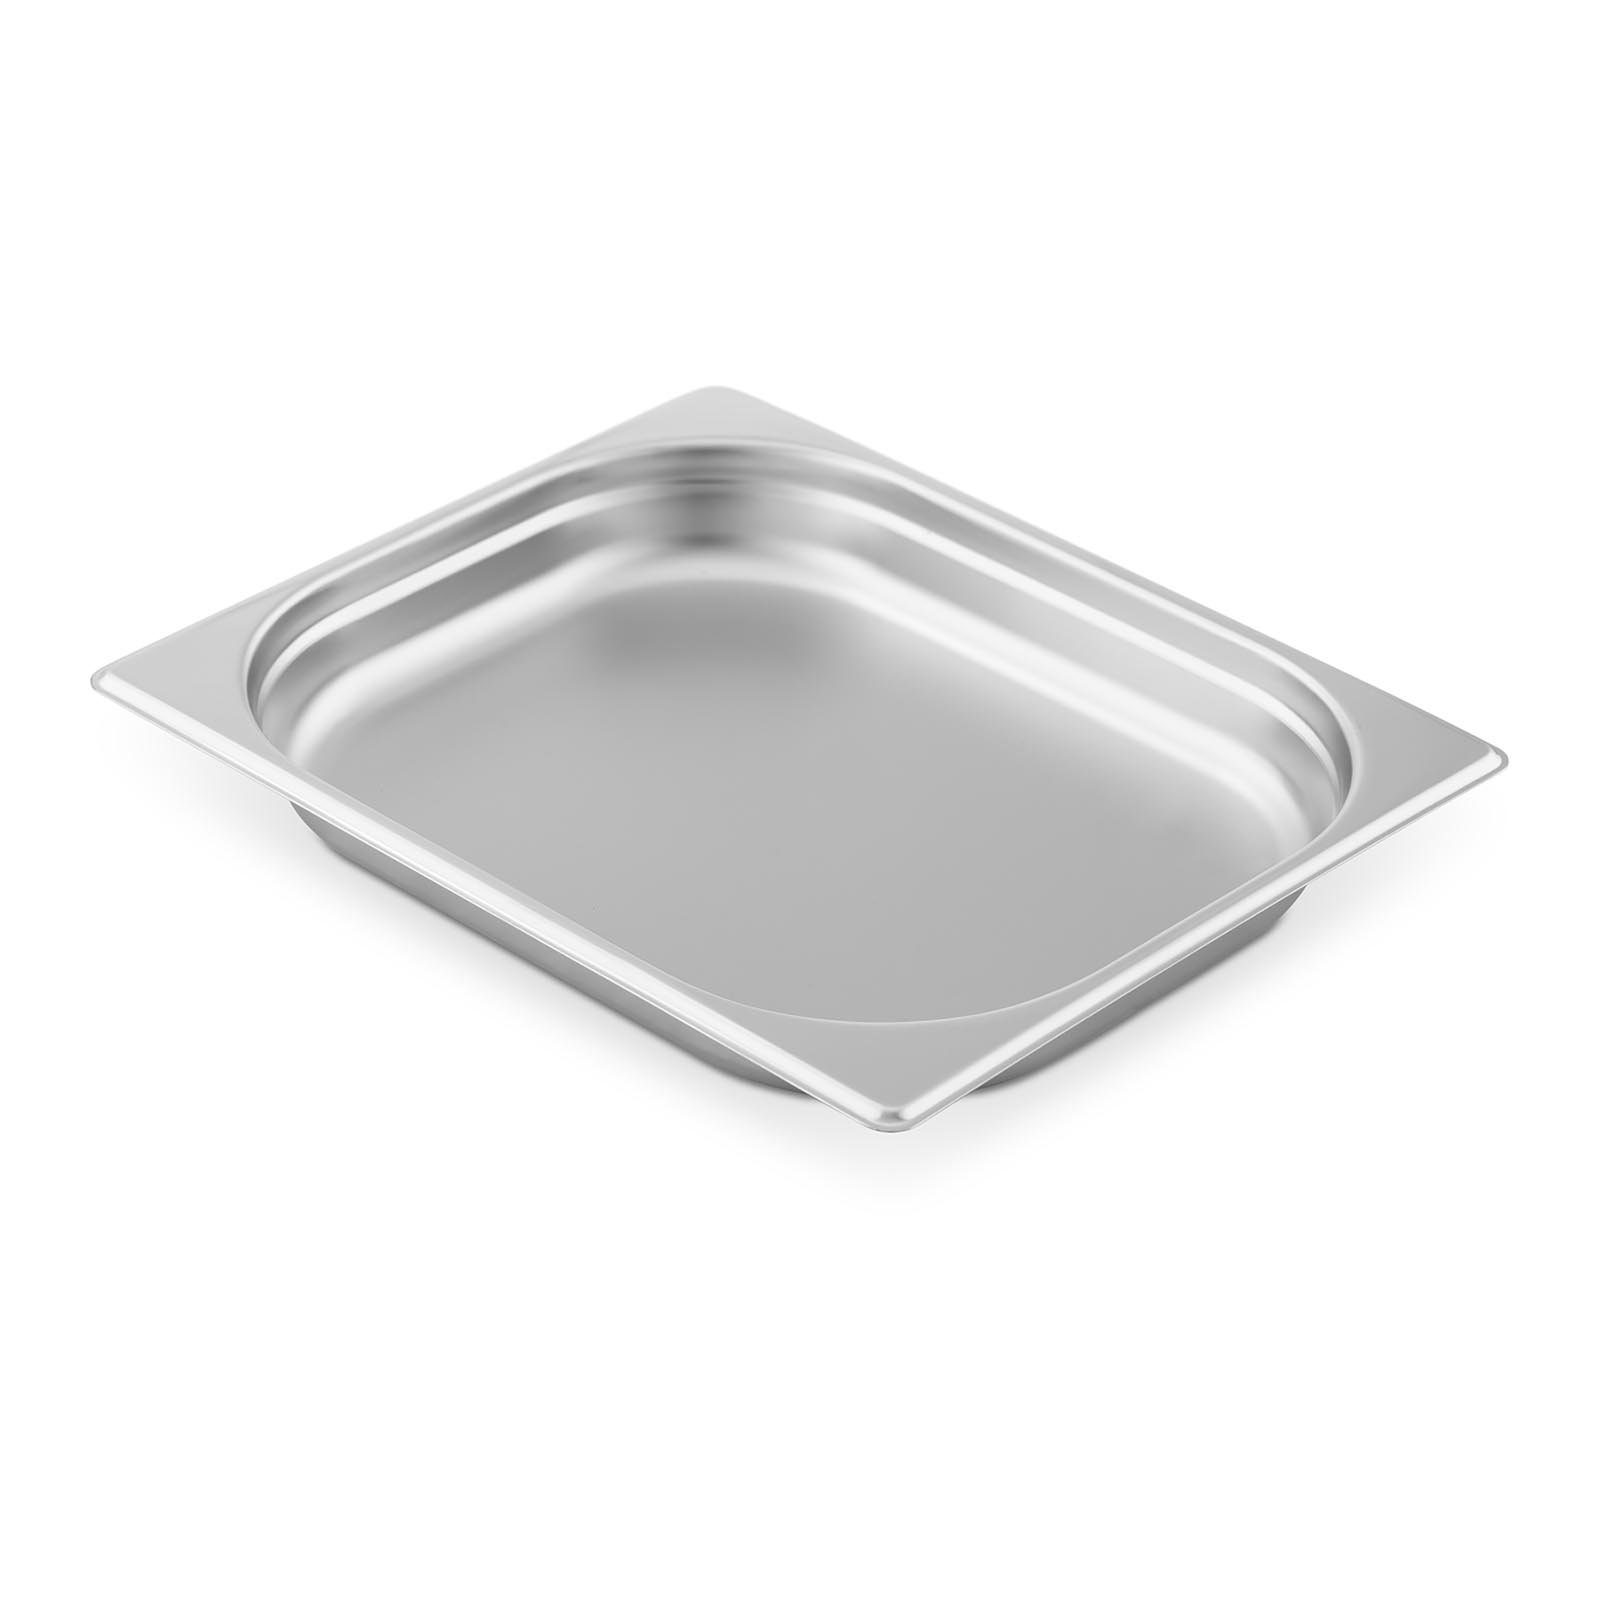 Marie GN Catering Gastronorm spülmaschinenfest 1/2 Behälter Royal 40mm Bain Thermobehälter tief